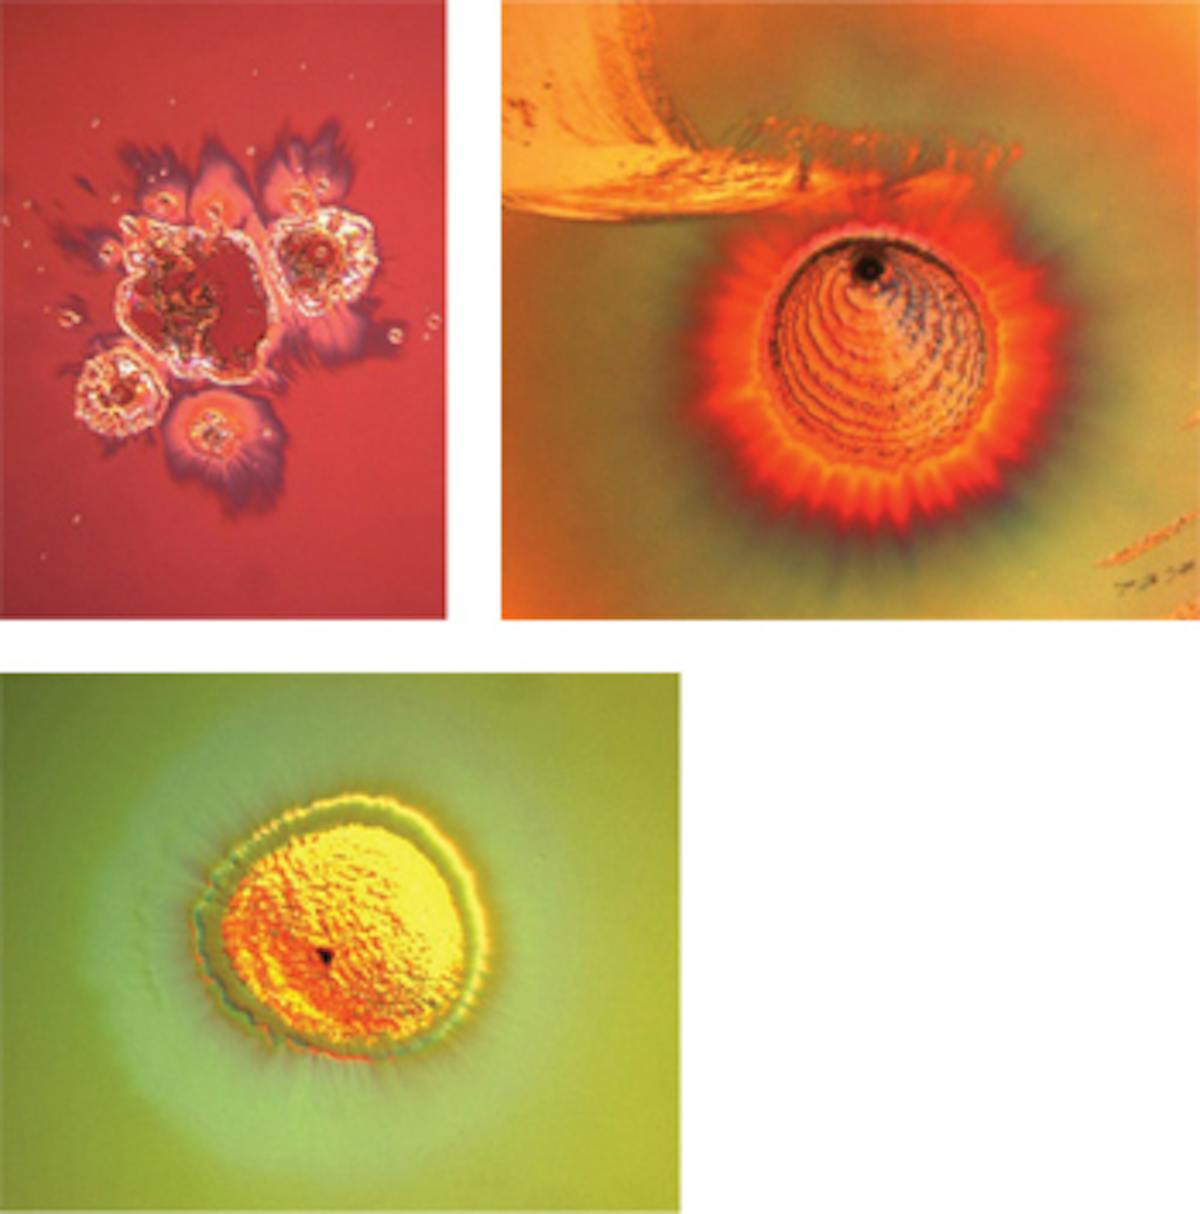 FIGURE 1. High magnification reveals images of high-energy laser-induced damage on coated surfaces.